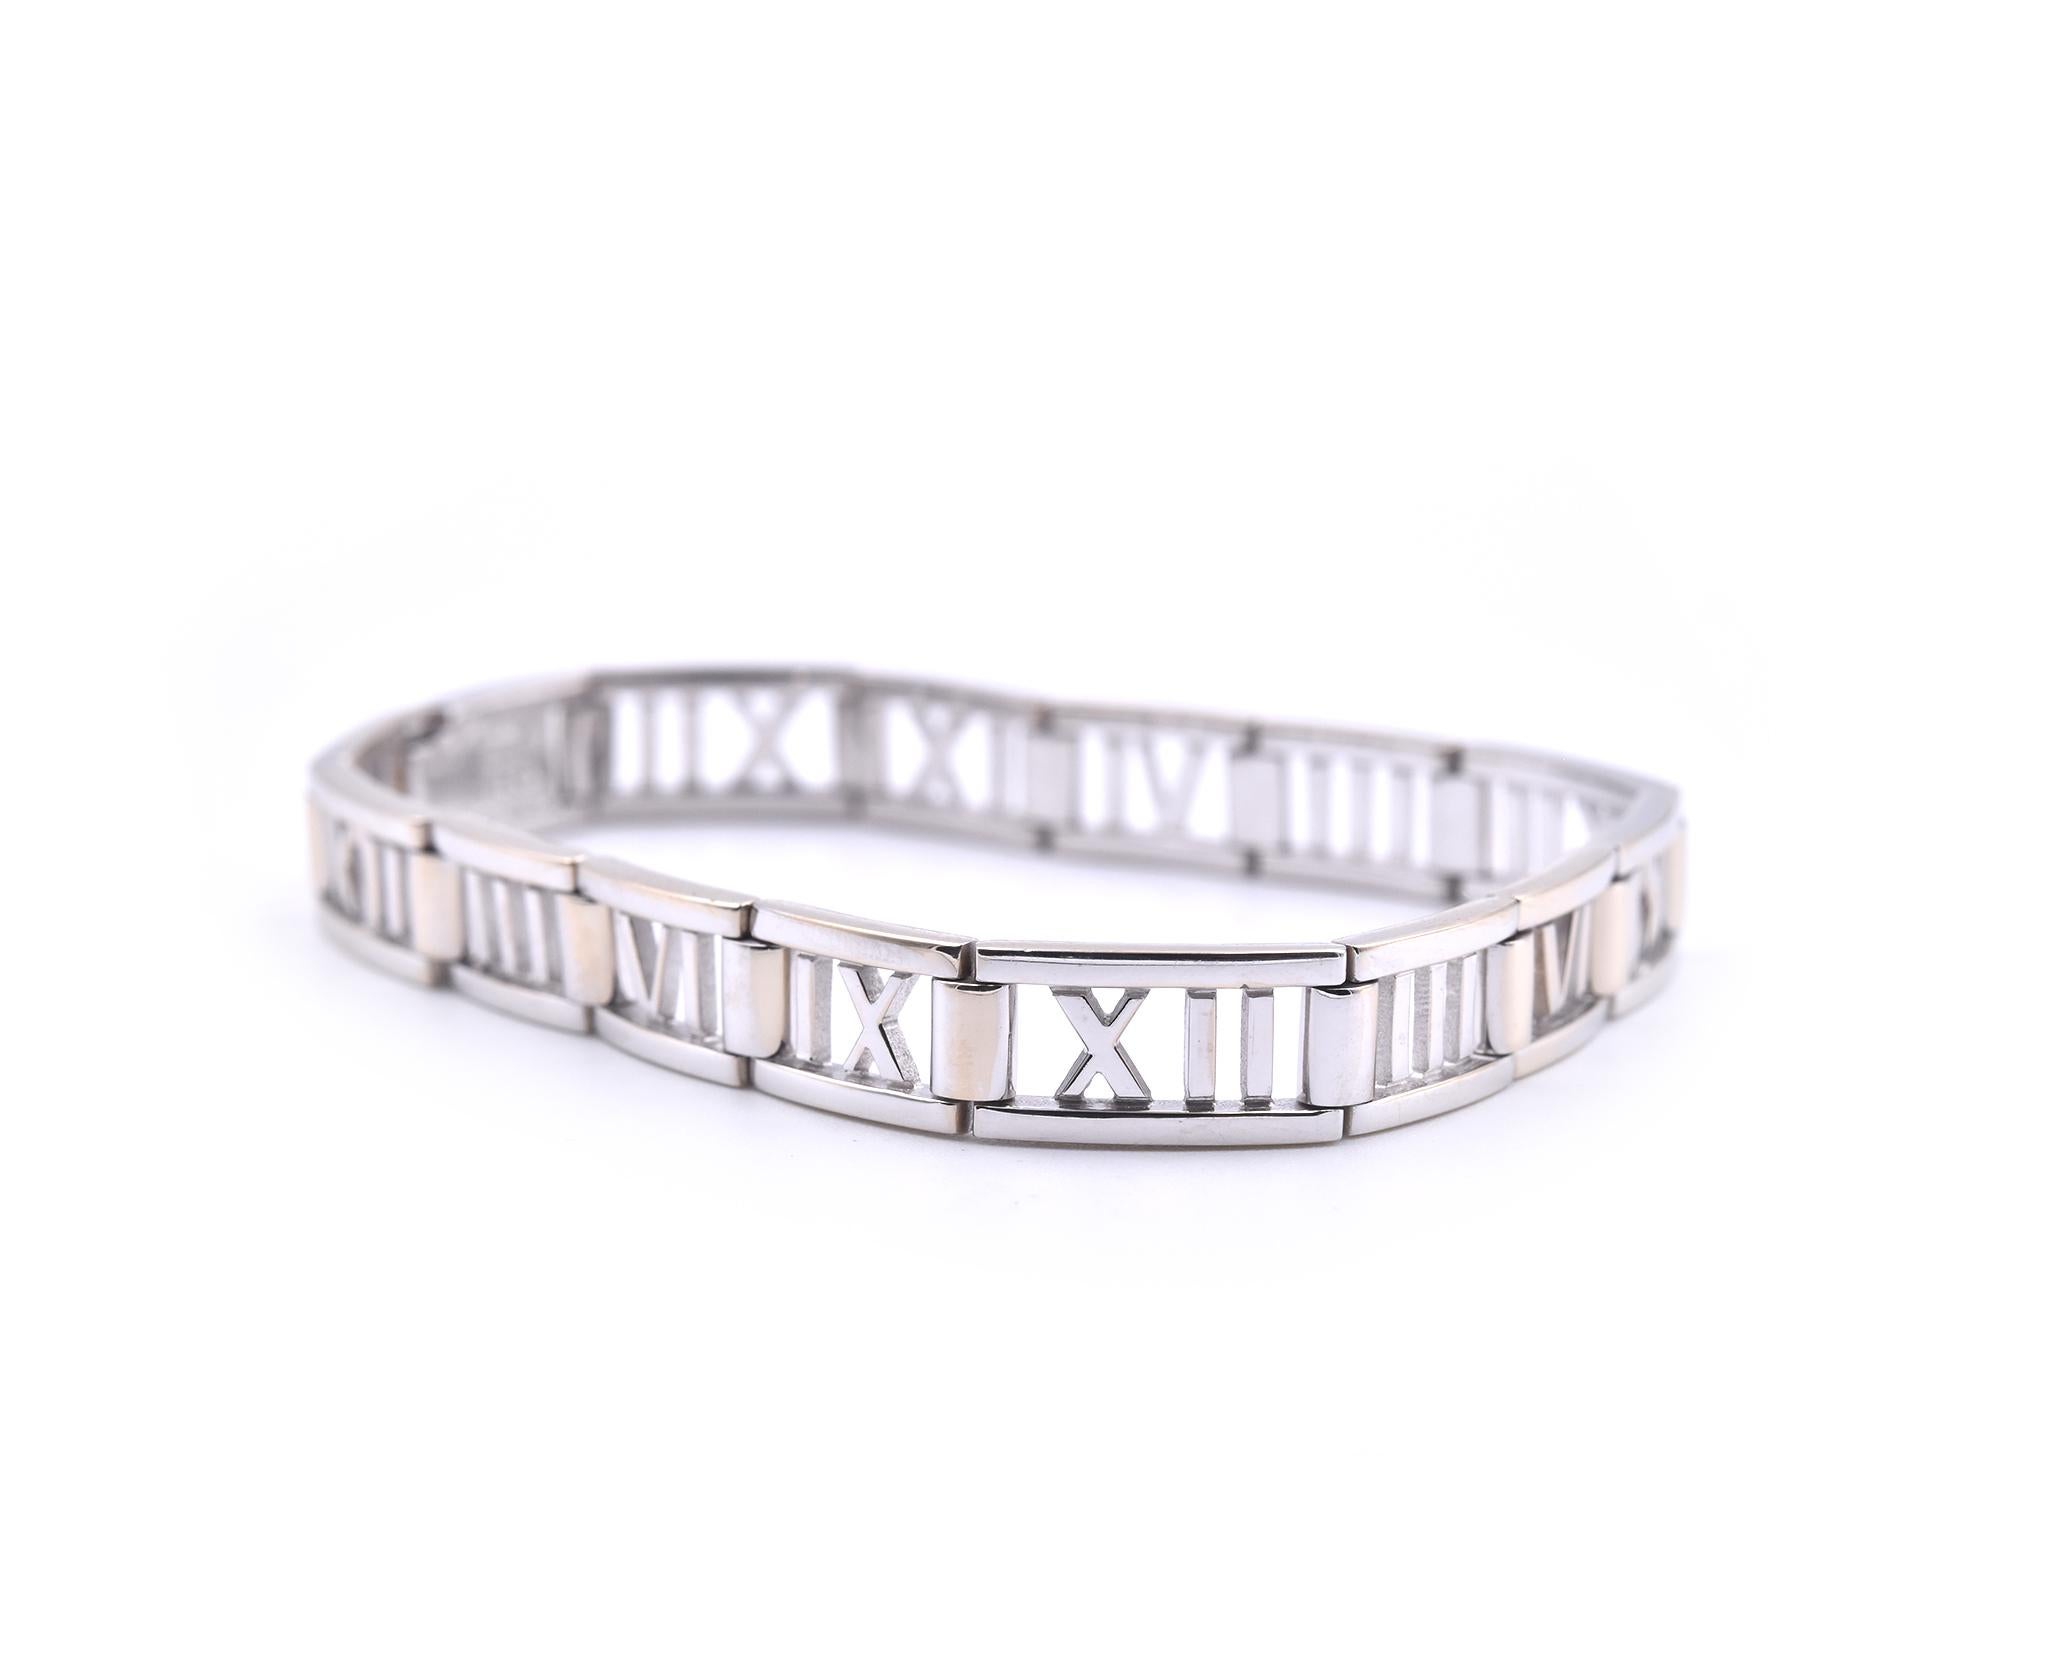 Designer: Tiffany & Co
Materials: 18k White Gold
Dimensions: bracelet measures 7 inches in length and 7.80mm in width
Weight: 27.04 grams